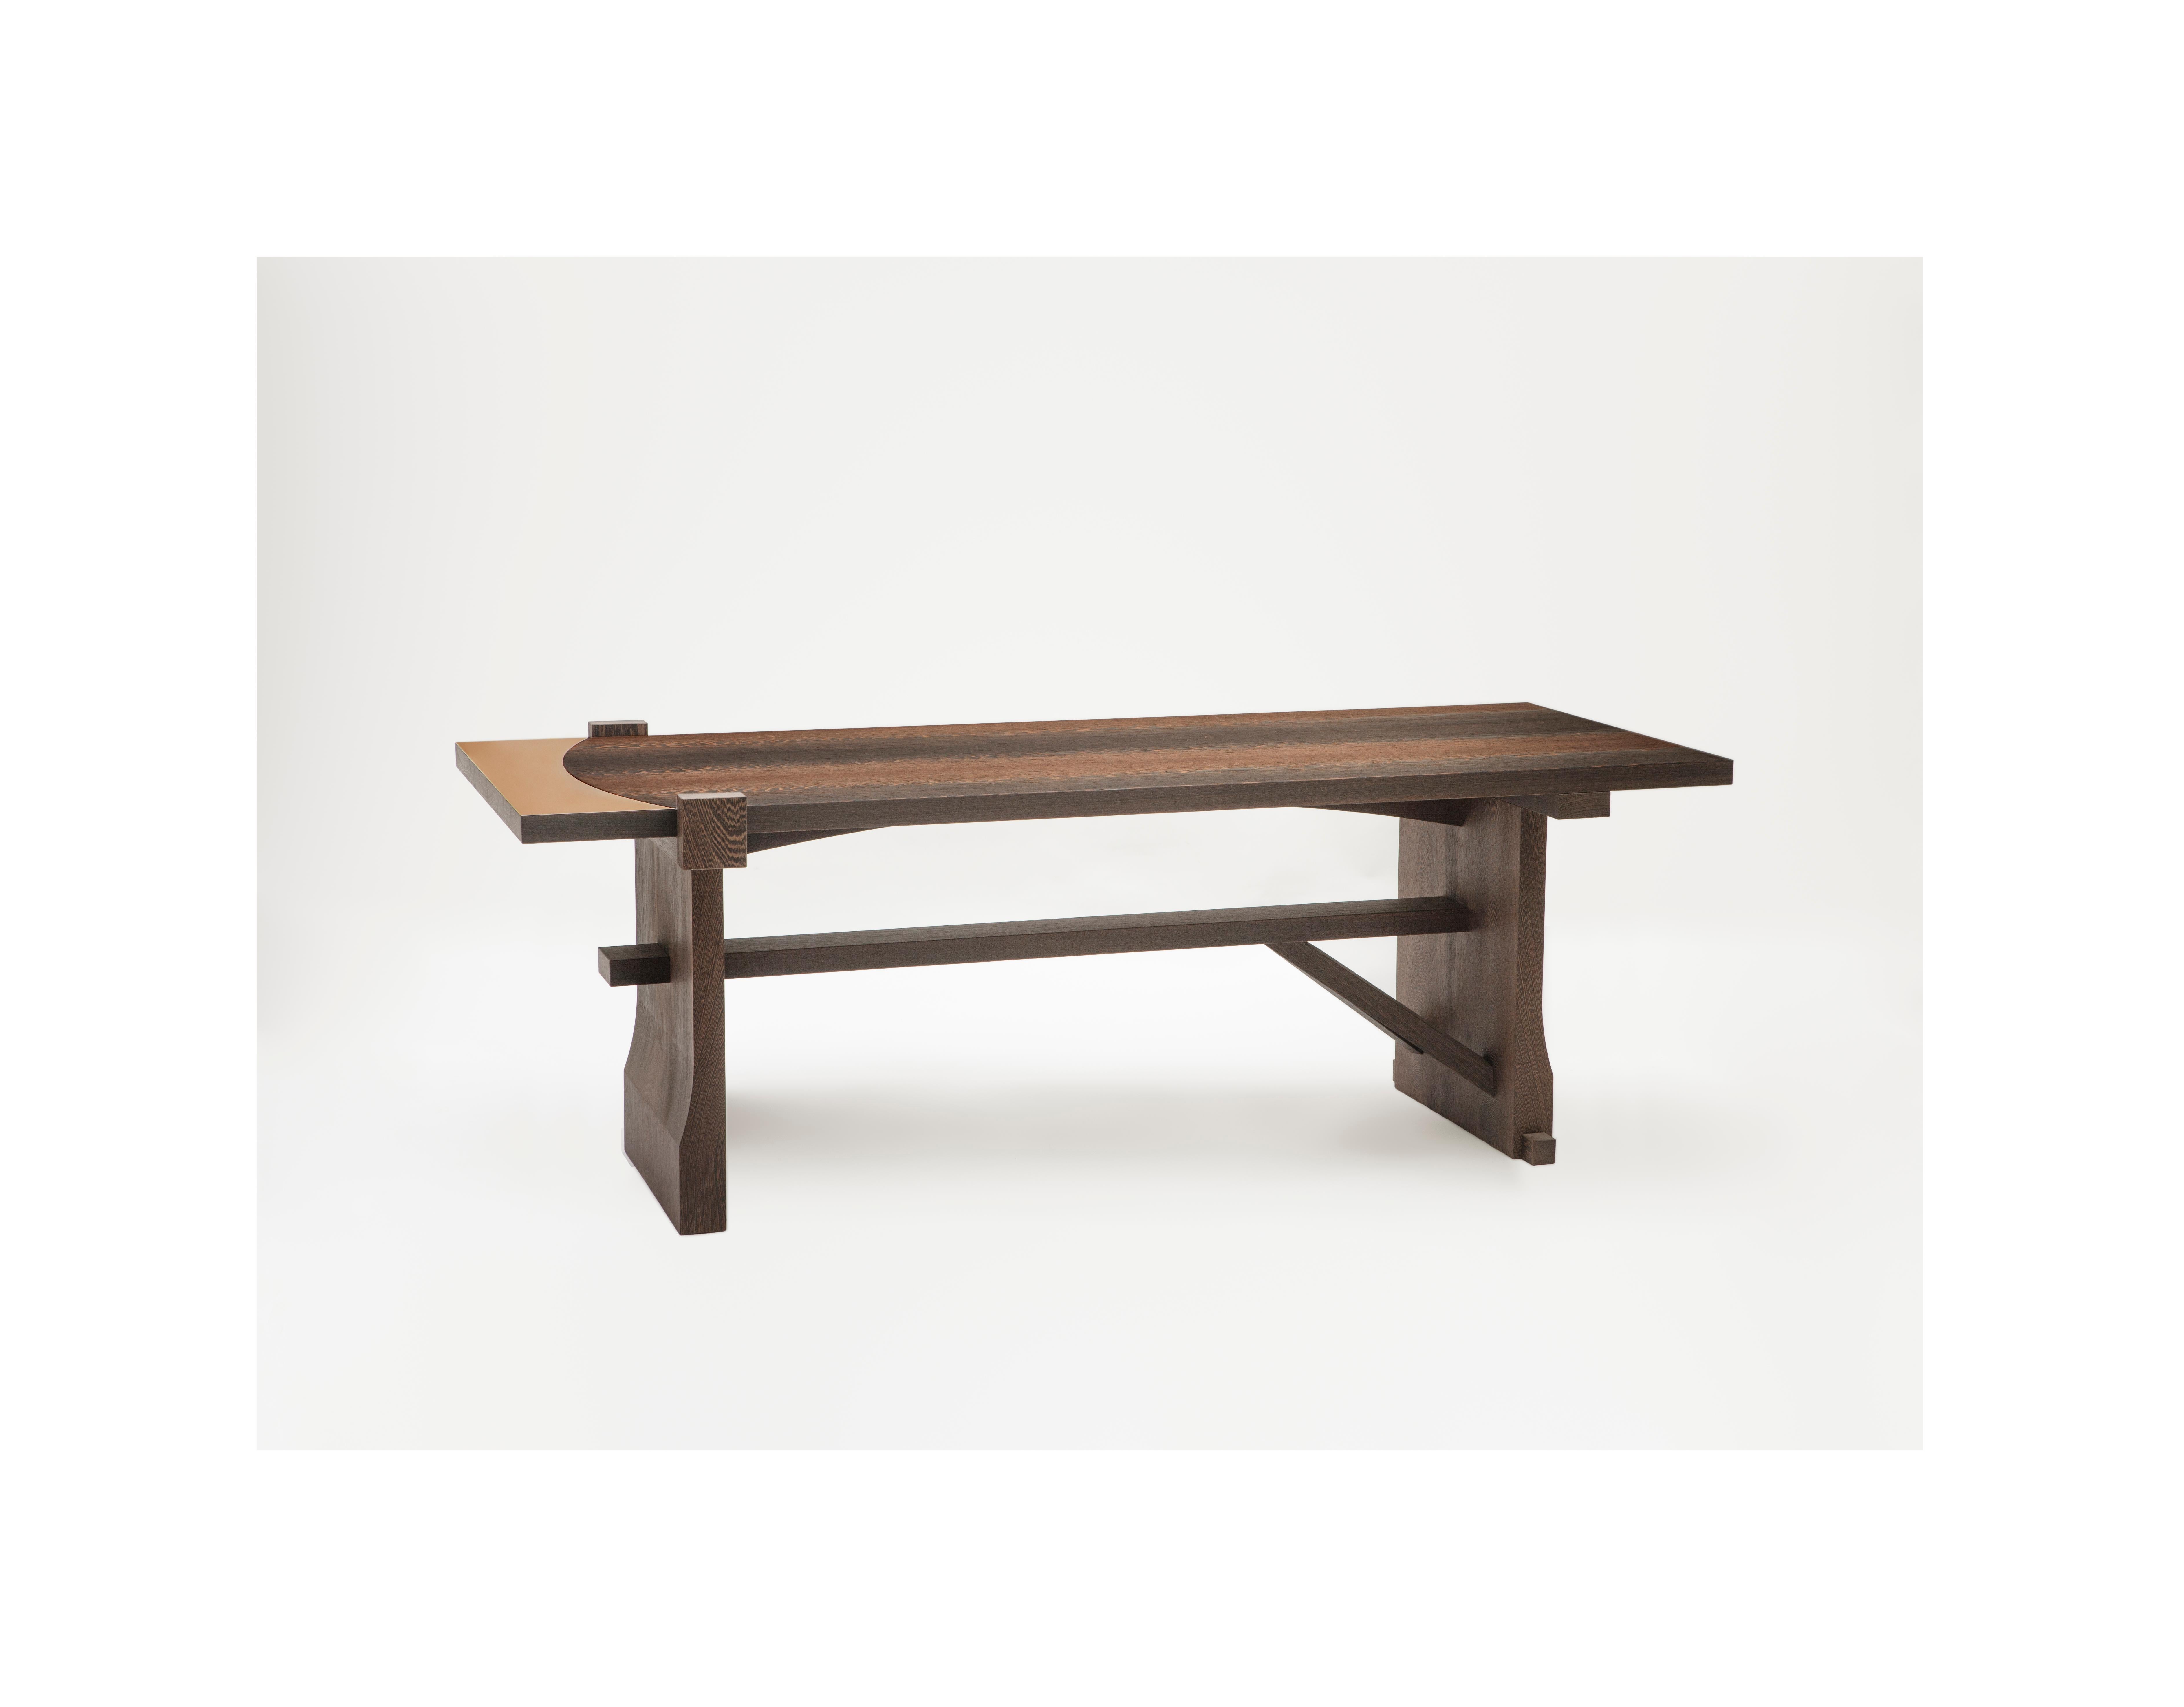 The Fratino table recalls the Italian tradition of sharing in simplicity, recalling the ancient image of a monastery’s refectory, where meals were taken in a common ritual.
Formed of a simple structure with an asymmetrical truss support, the wooden